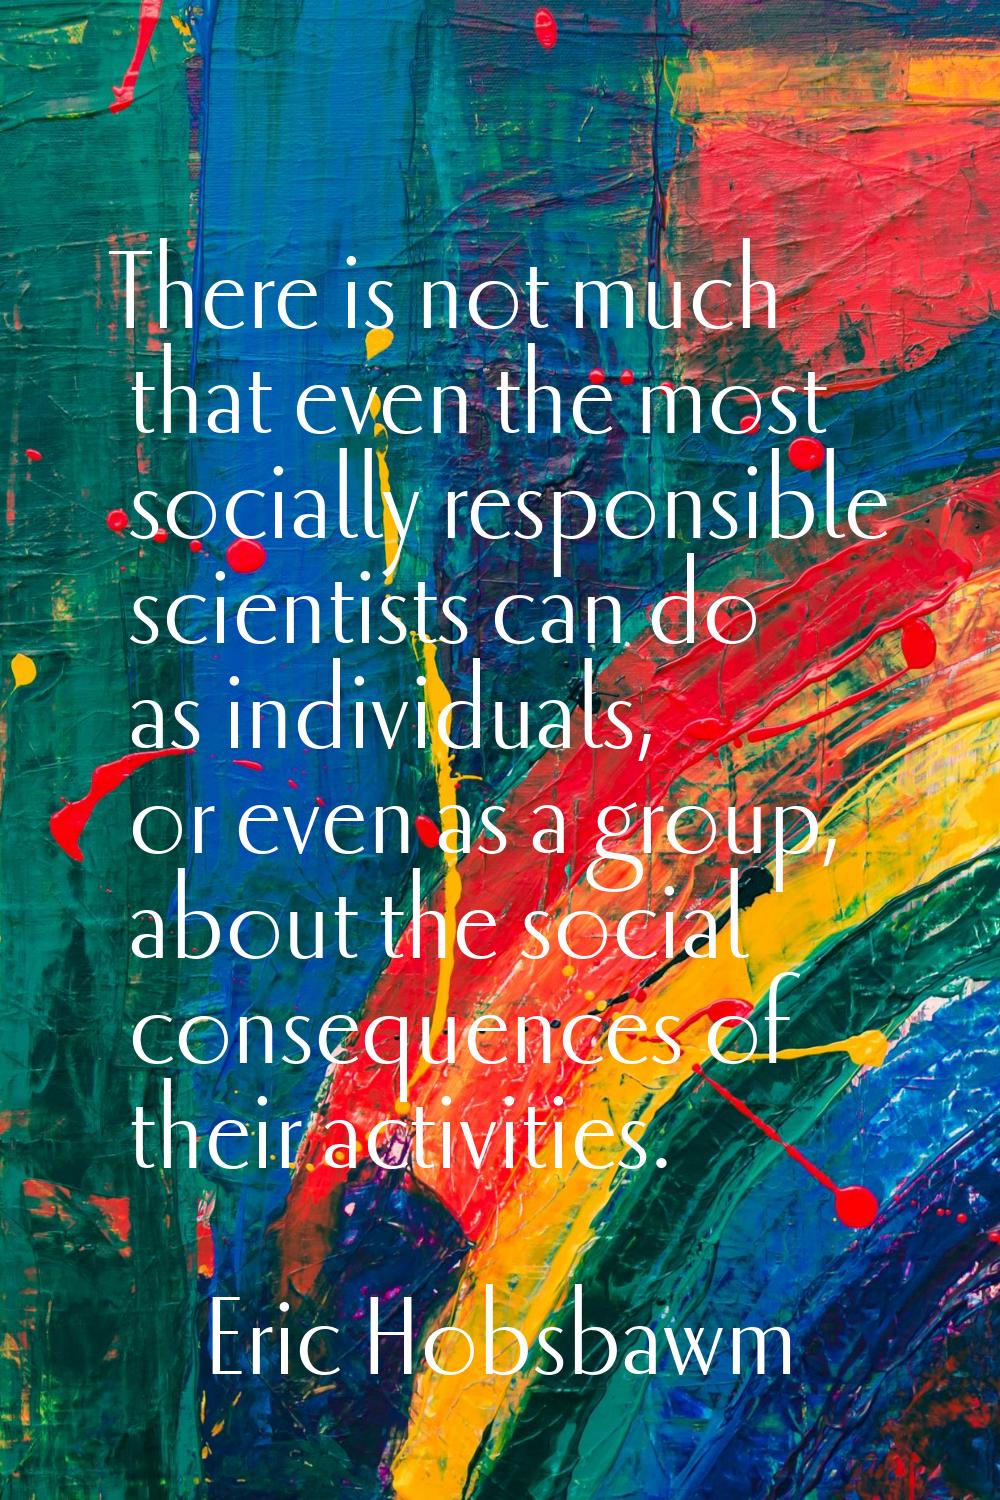 There is not much that even the most socially responsible scientists can do as individuals, or even